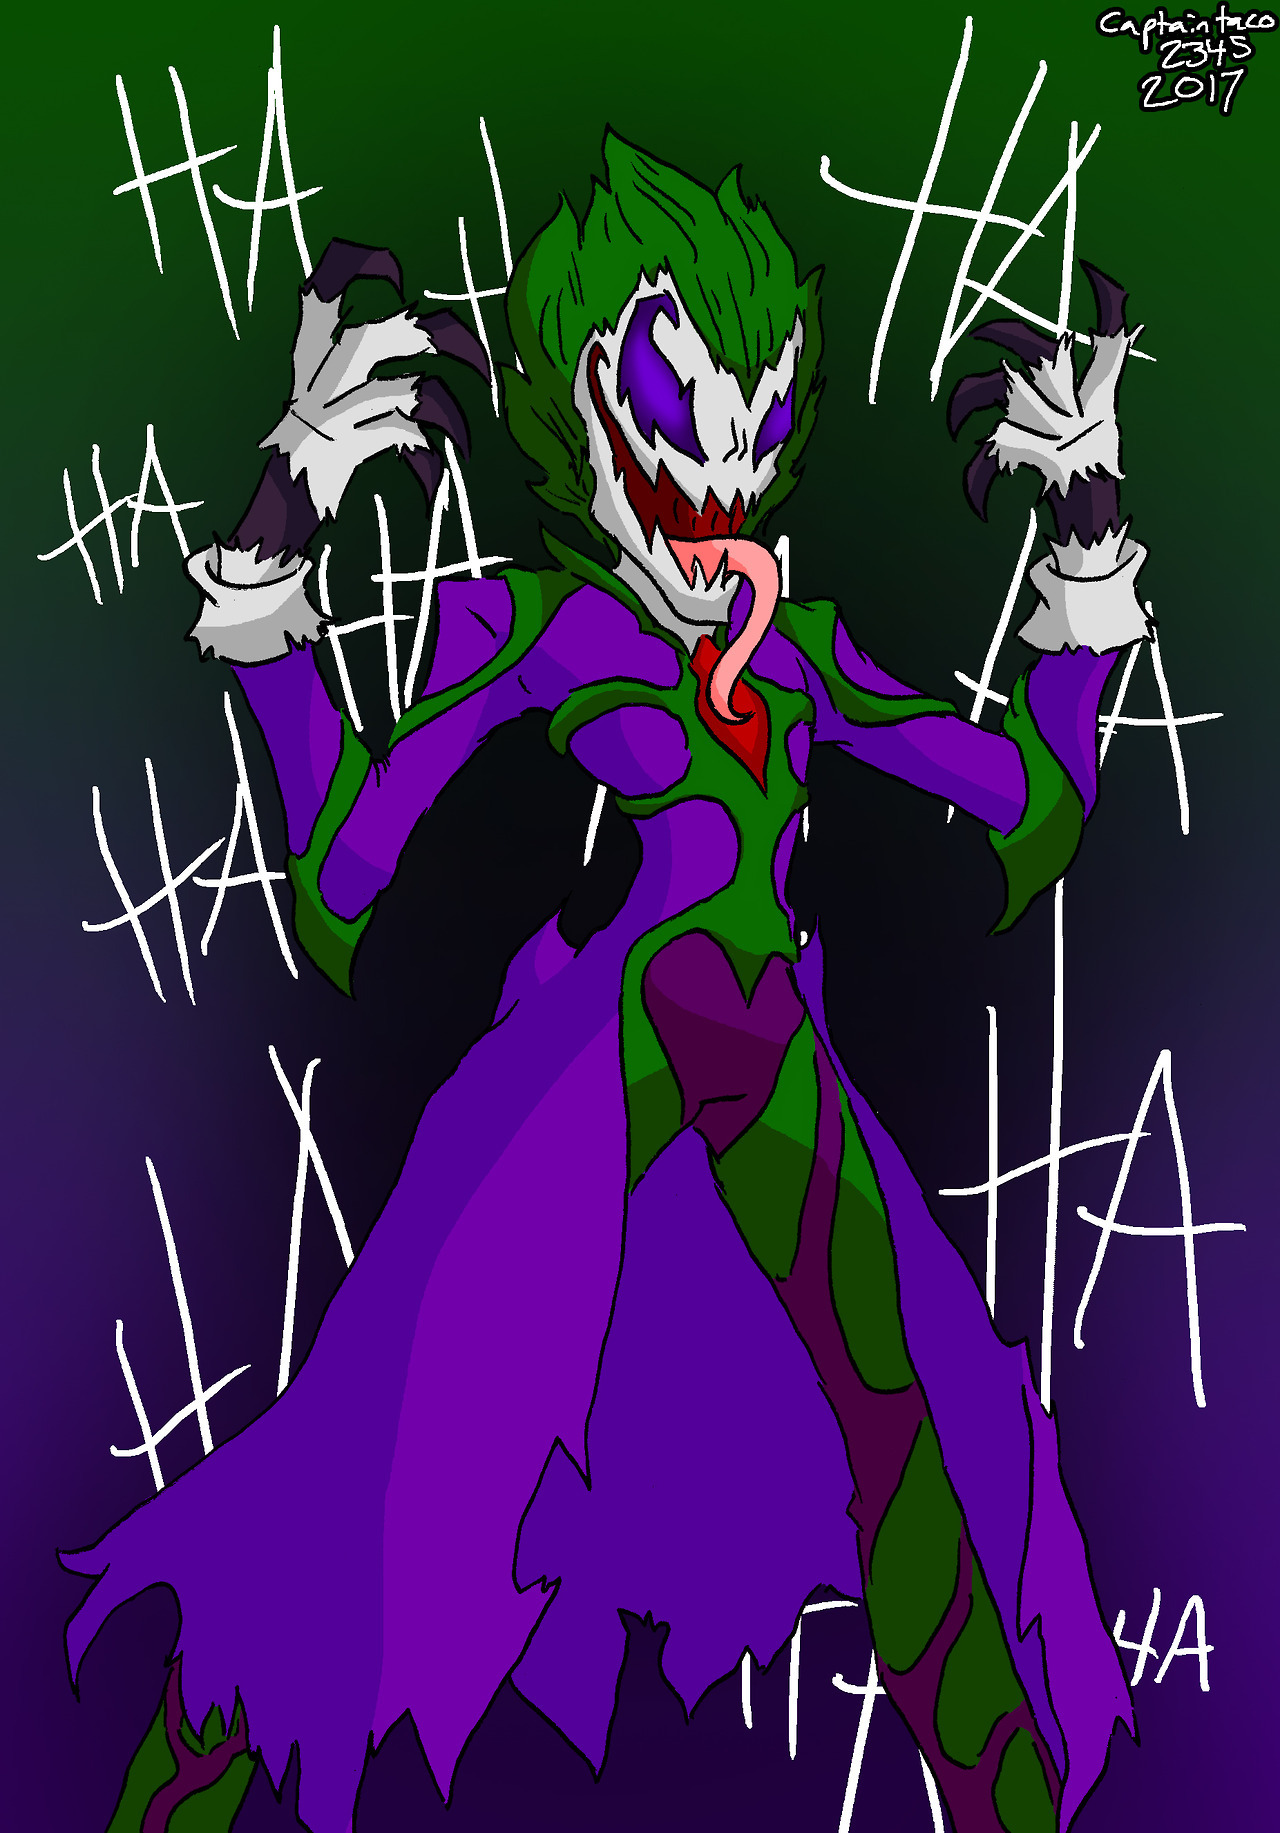 Joker Venom. I’m not sure if that crossover has ever happened before, but this